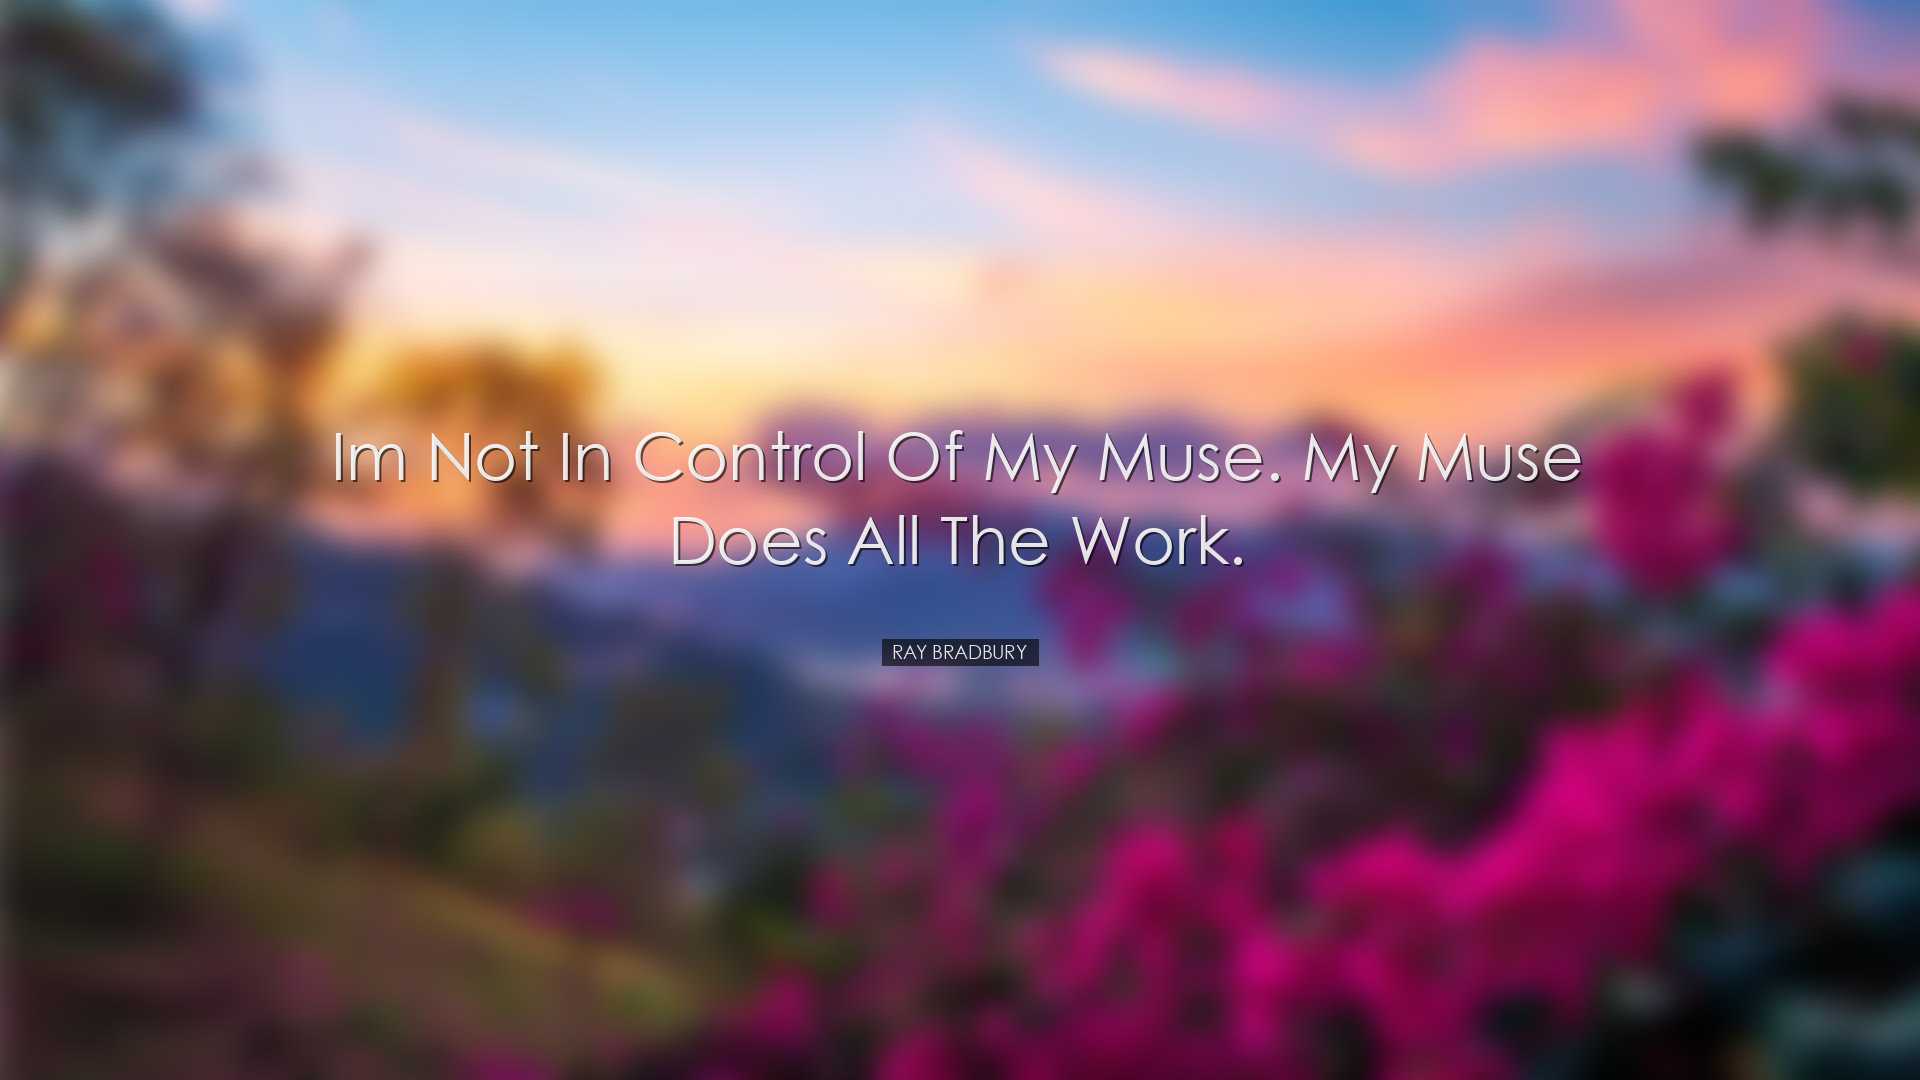 Im not in control of my muse. My muse does all the work. - Ray Bra